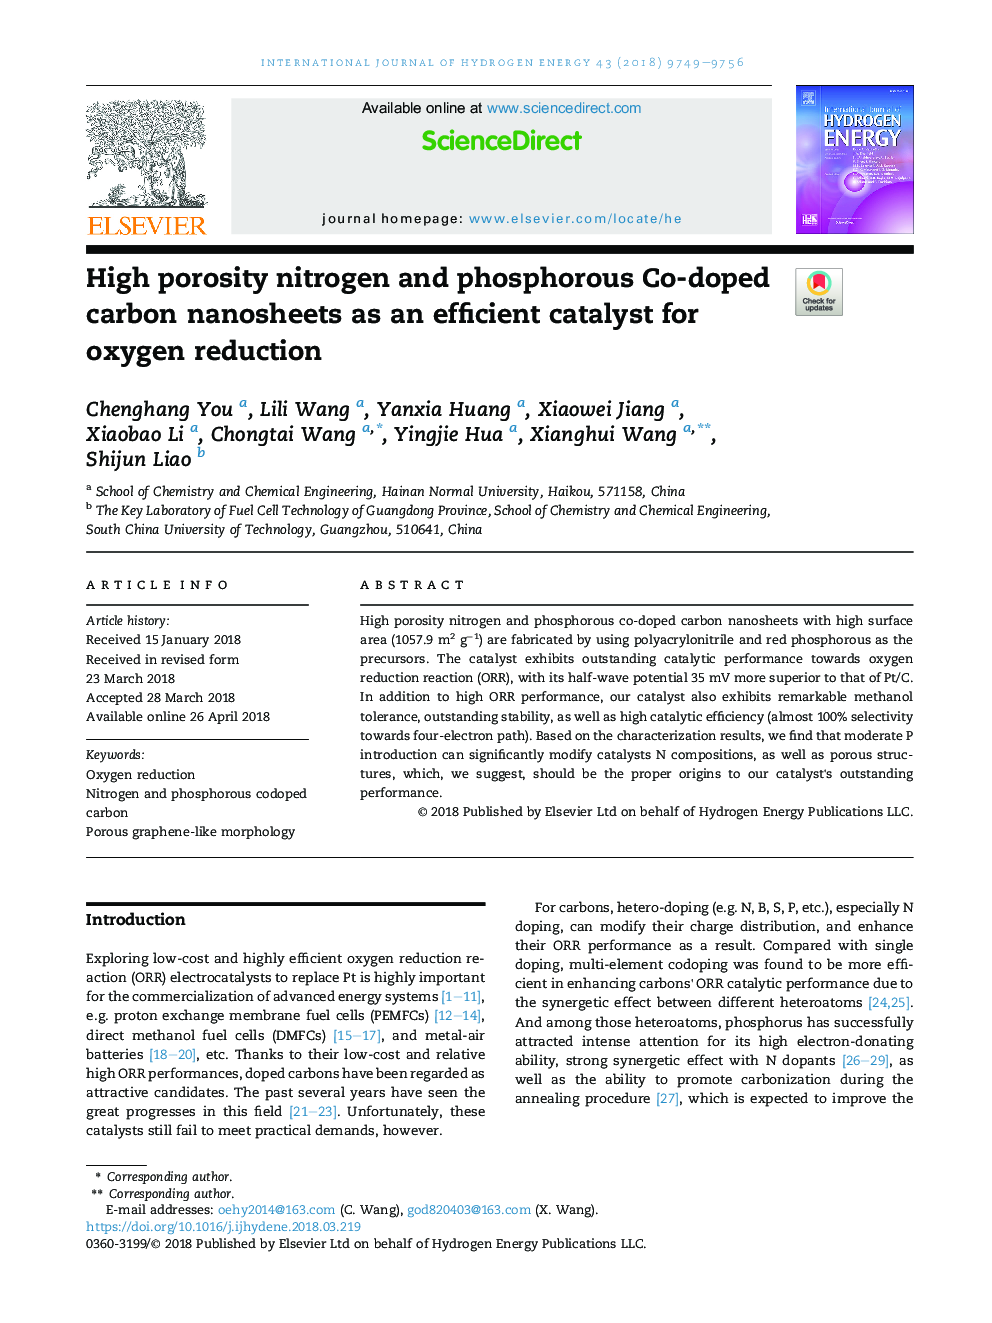 High porosity nitrogen and phosphorous Co-doped carbon nanosheets as an efficient catalyst for oxygen reduction